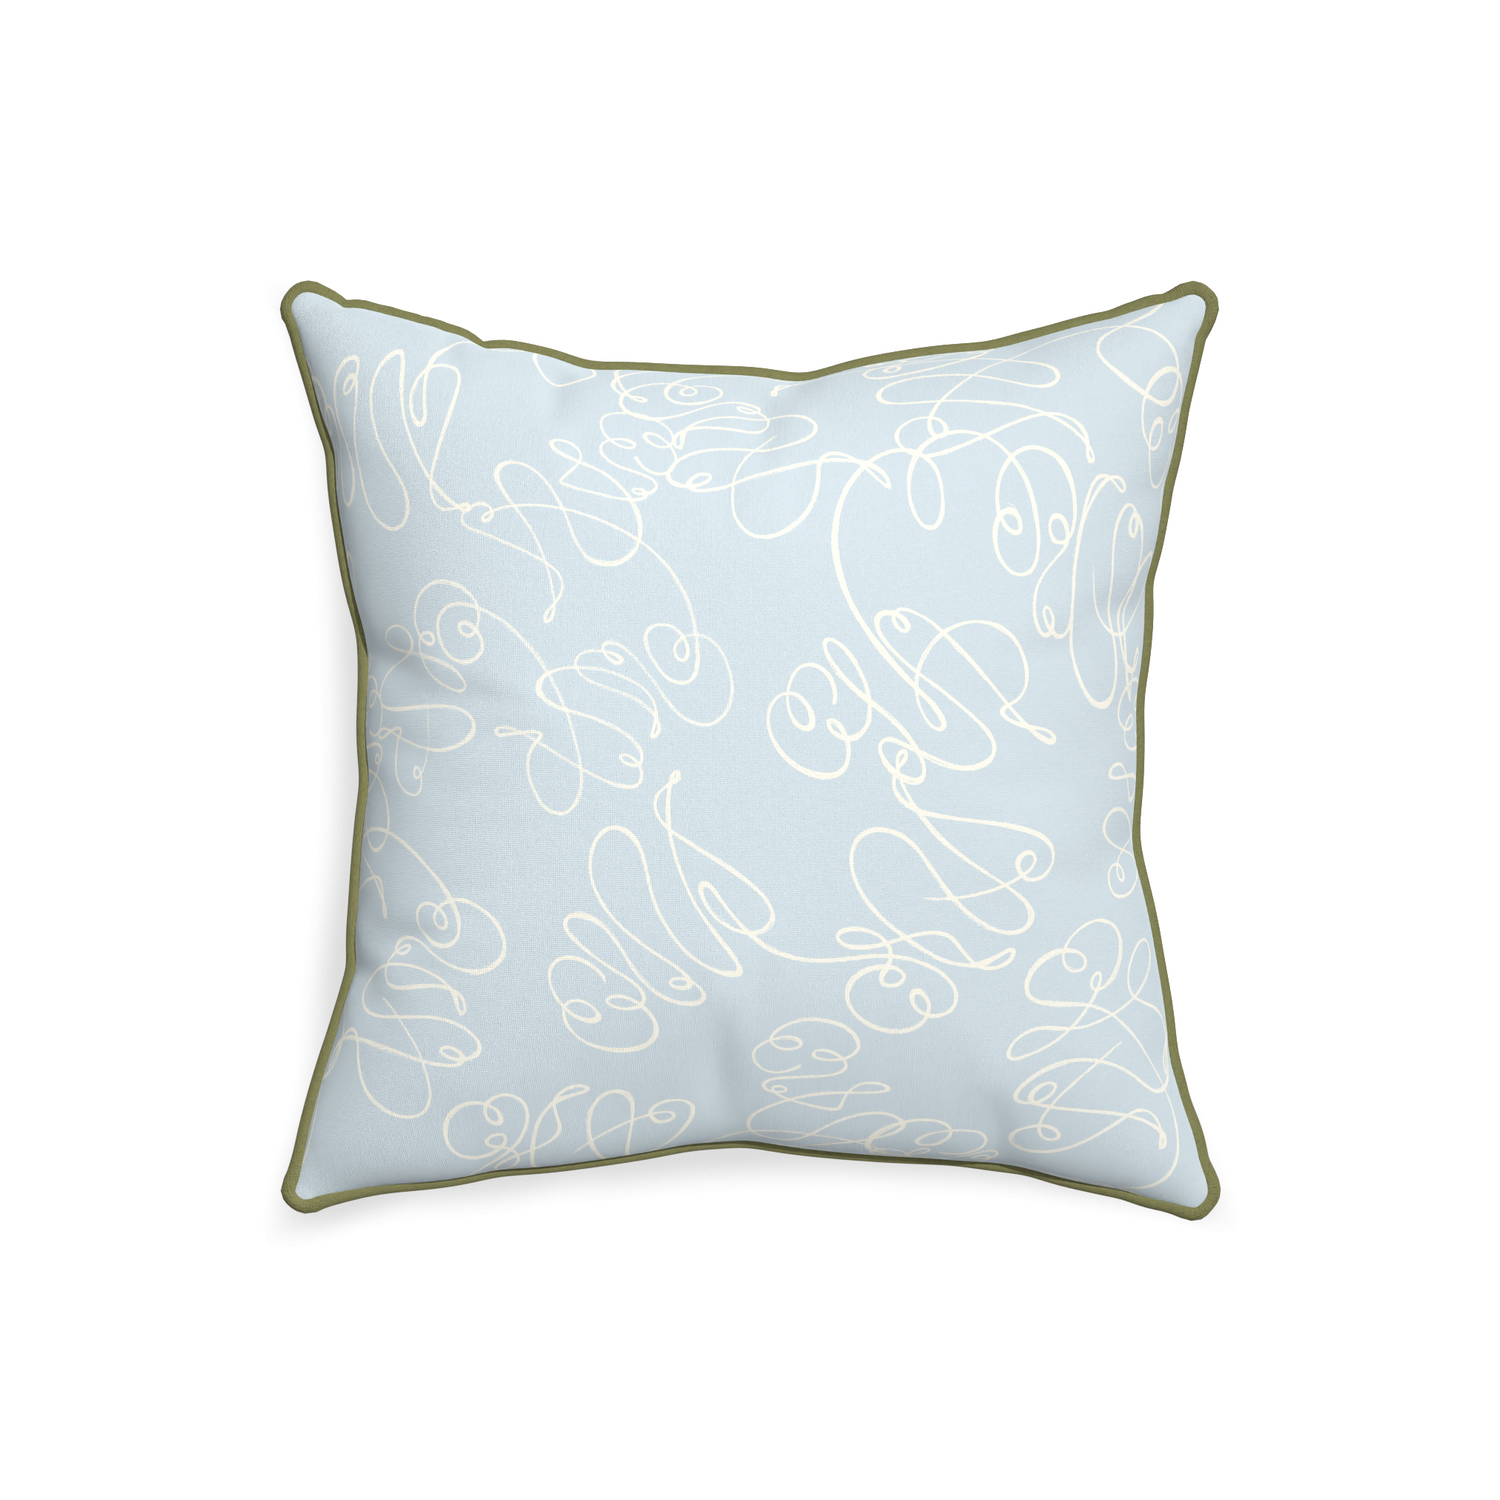 20-square mirabella custom pillow with moss piping on white background